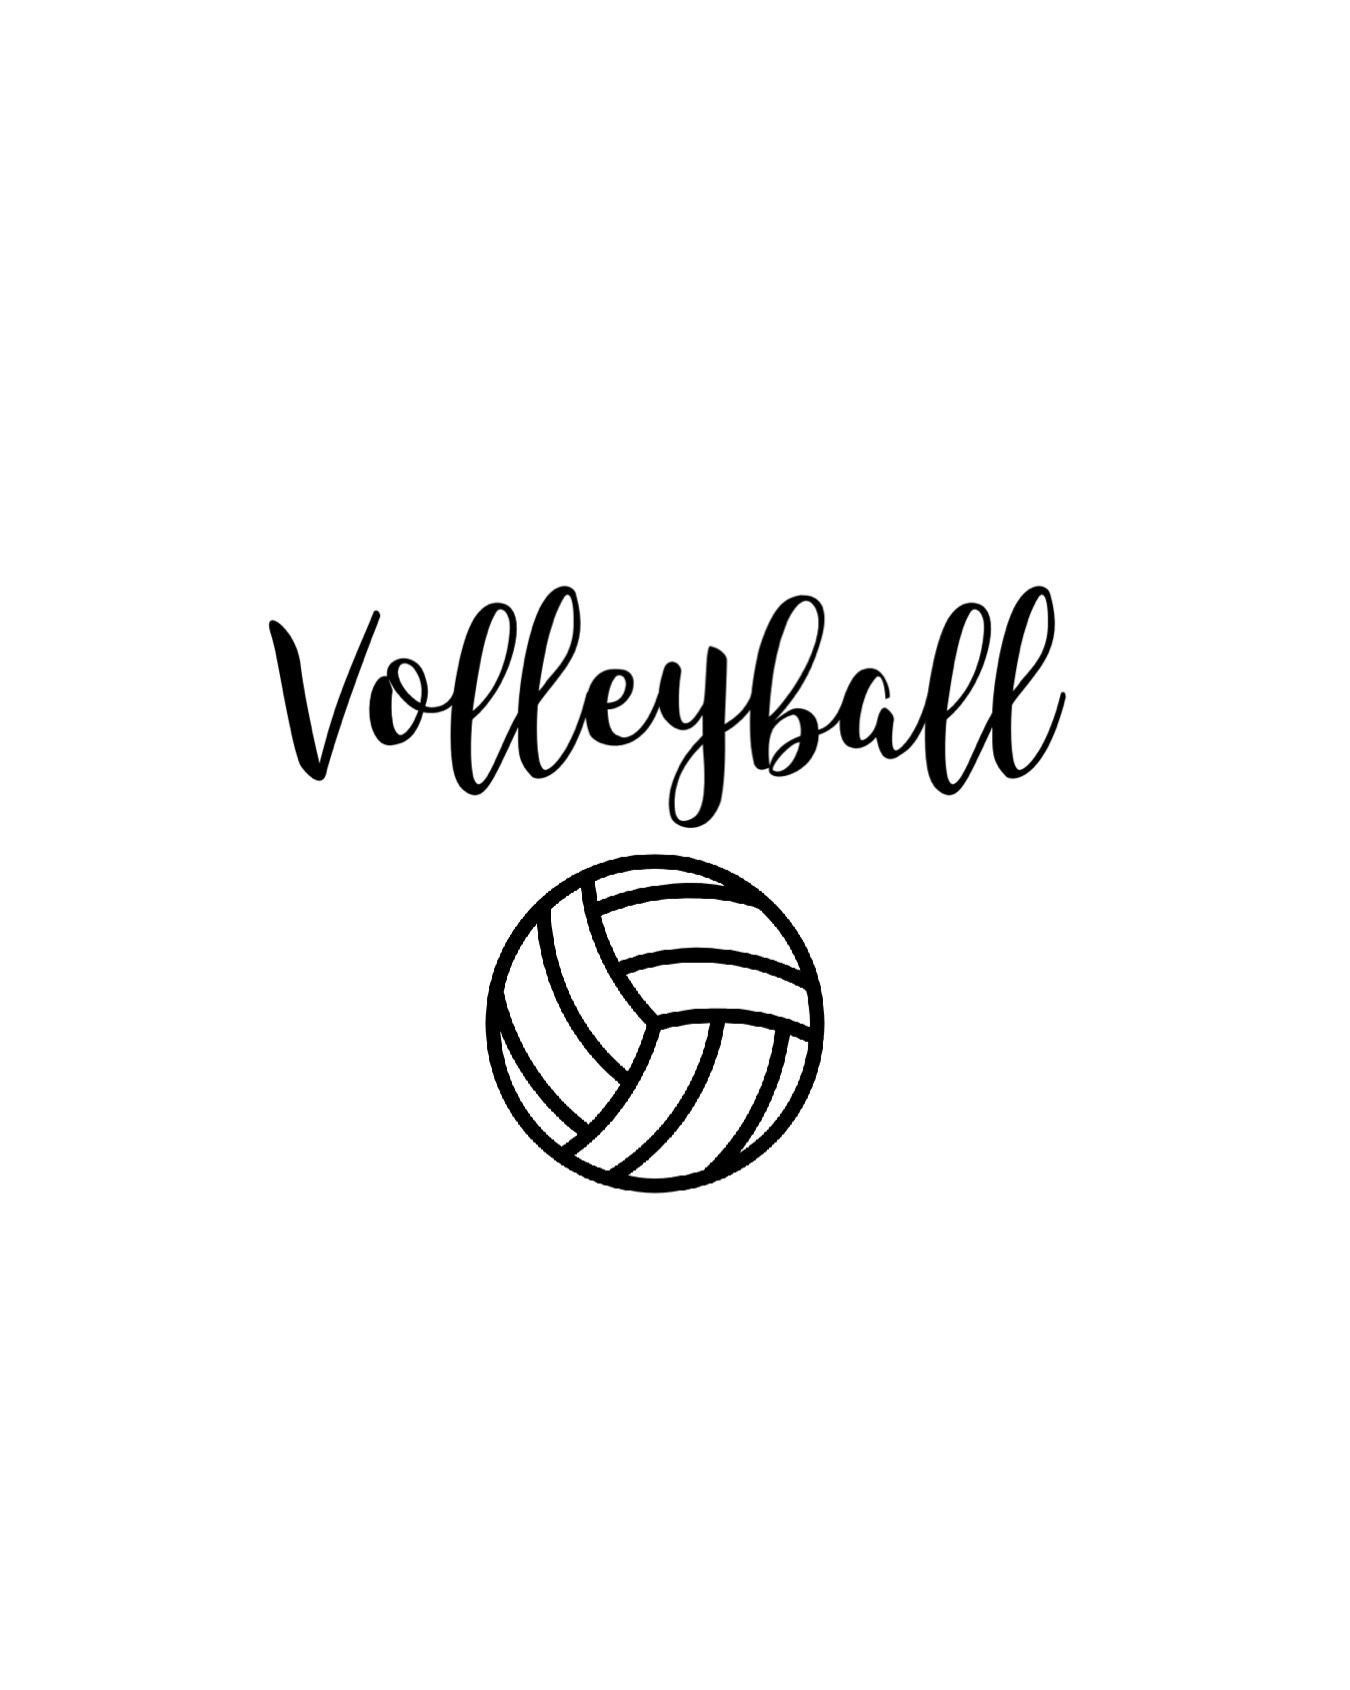 Premium Vector  Volleyball lettering text on white background with ball  sport fitness activity symbol concept callig